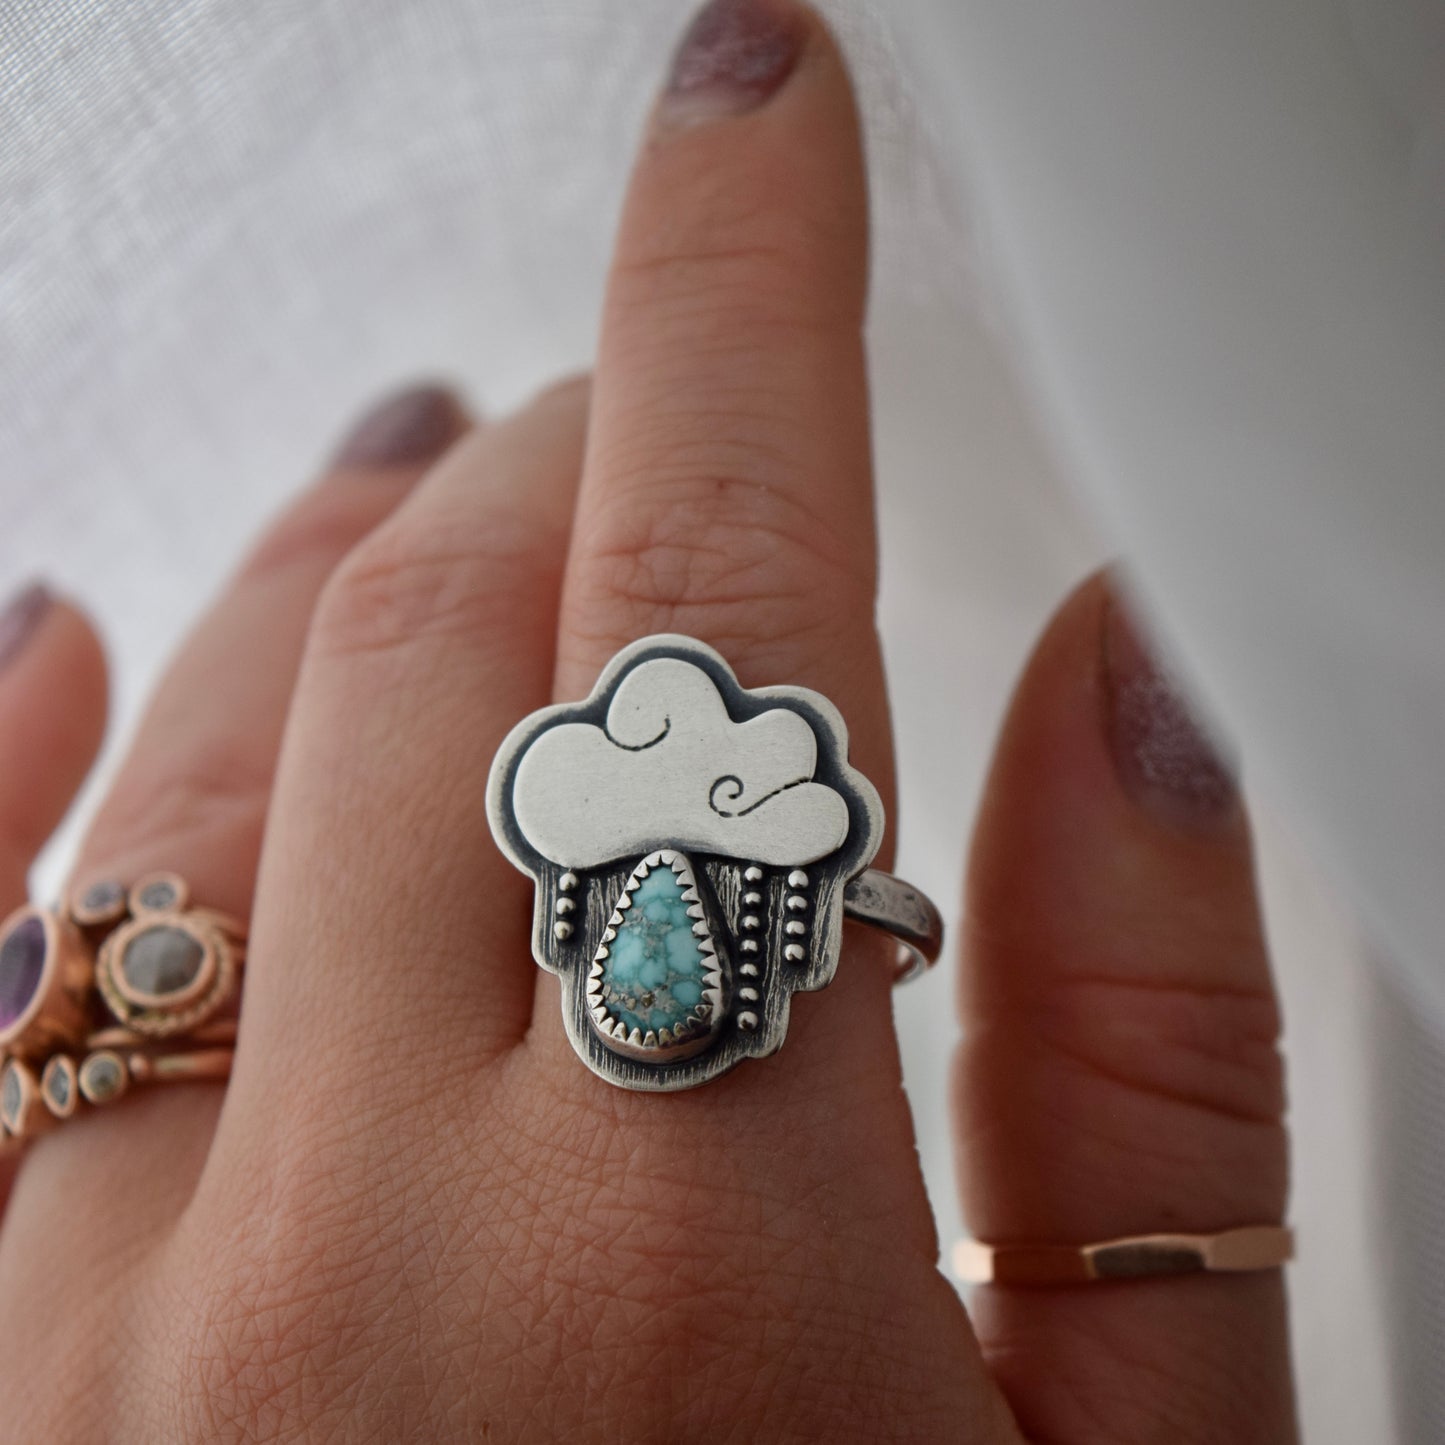 Little Dark Cloud Ring with White Water Turquoise size 10